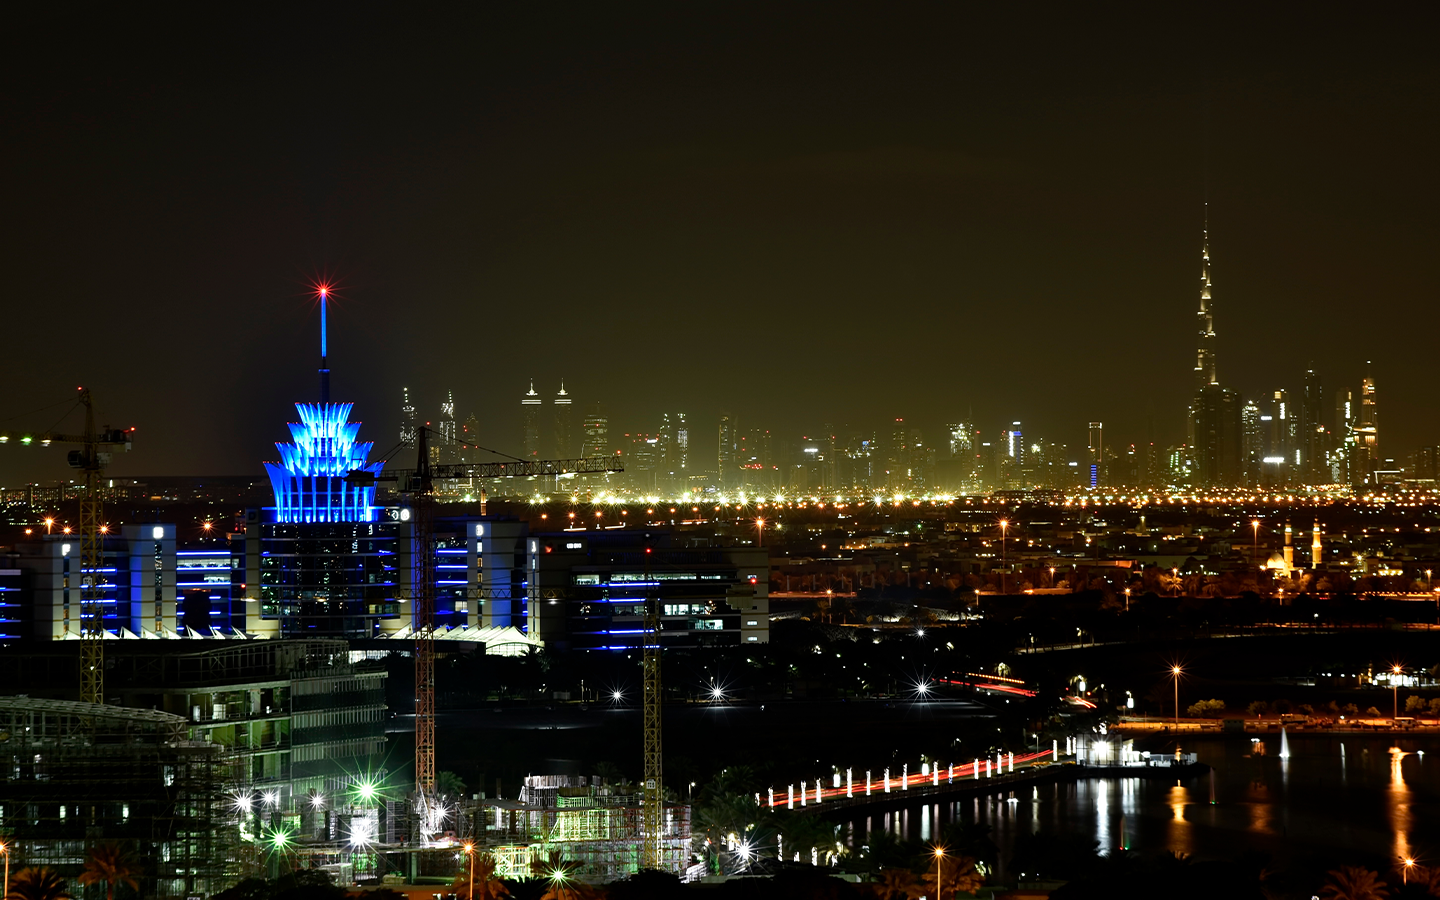 Dubai Silicon Oasis has a wide range of properties on offer for sale and rent